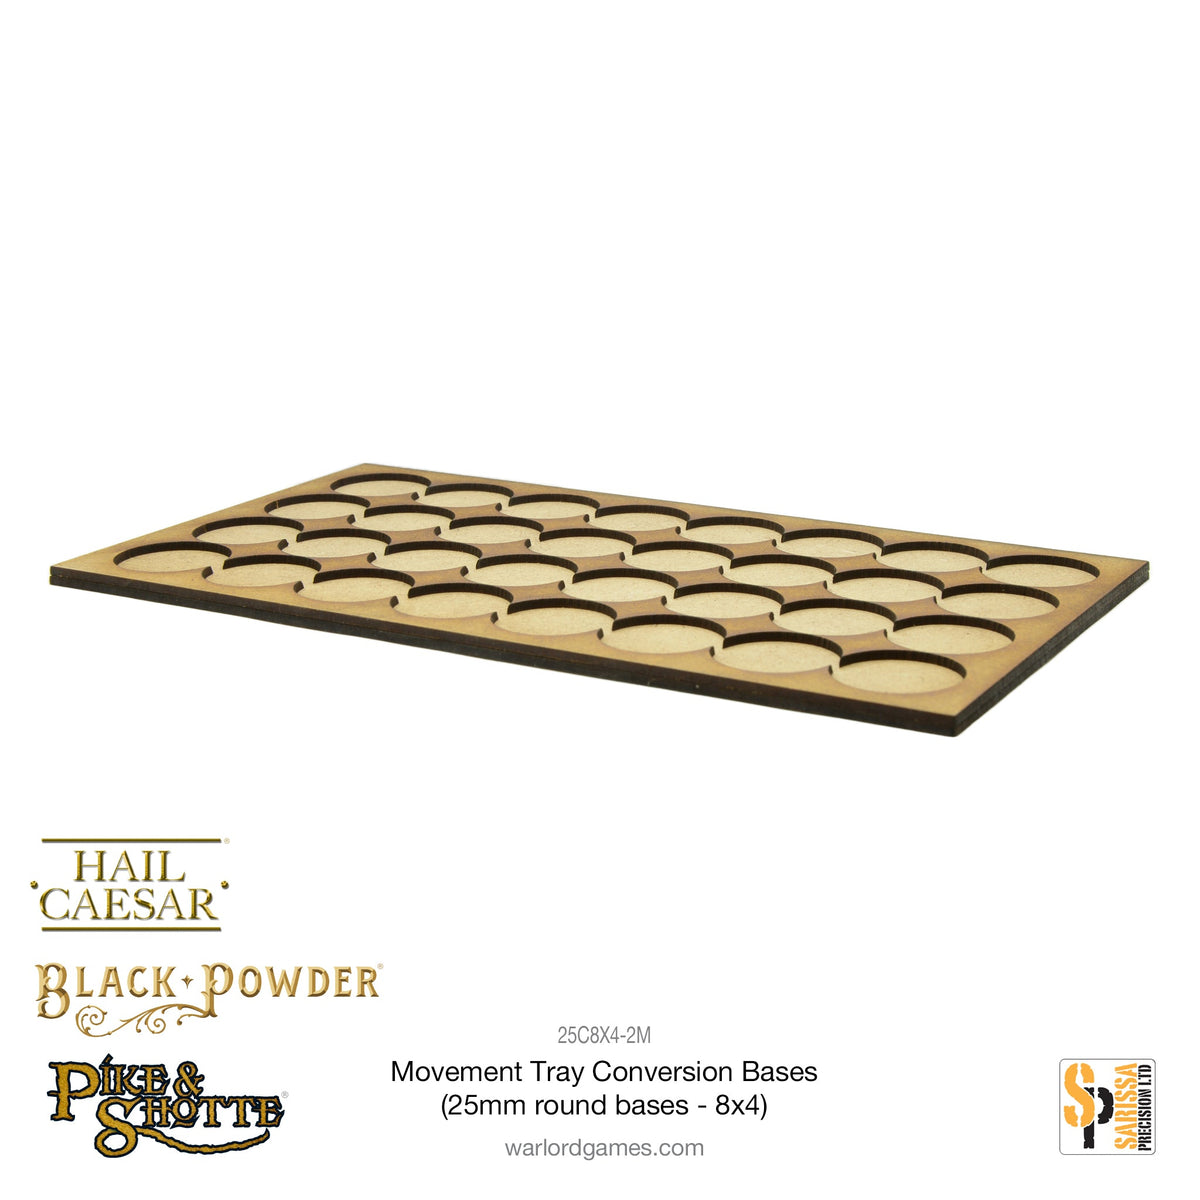 Movement Tray Conversion Bases (25mm round bases - 8x4)